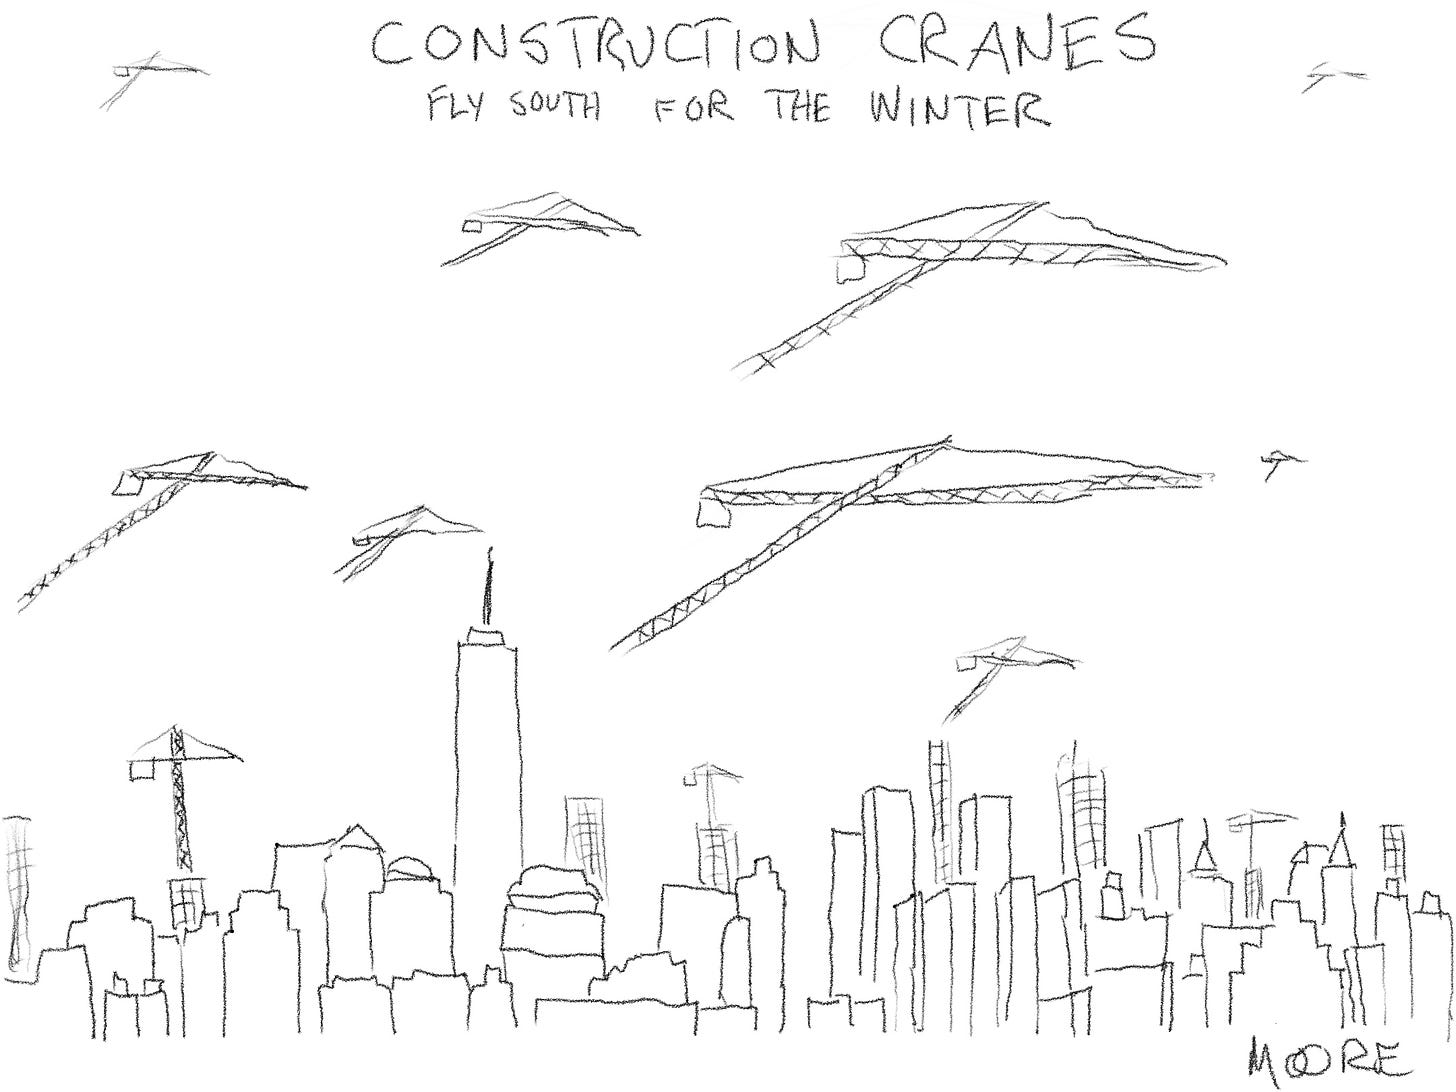 construction cranes fly south for the winter